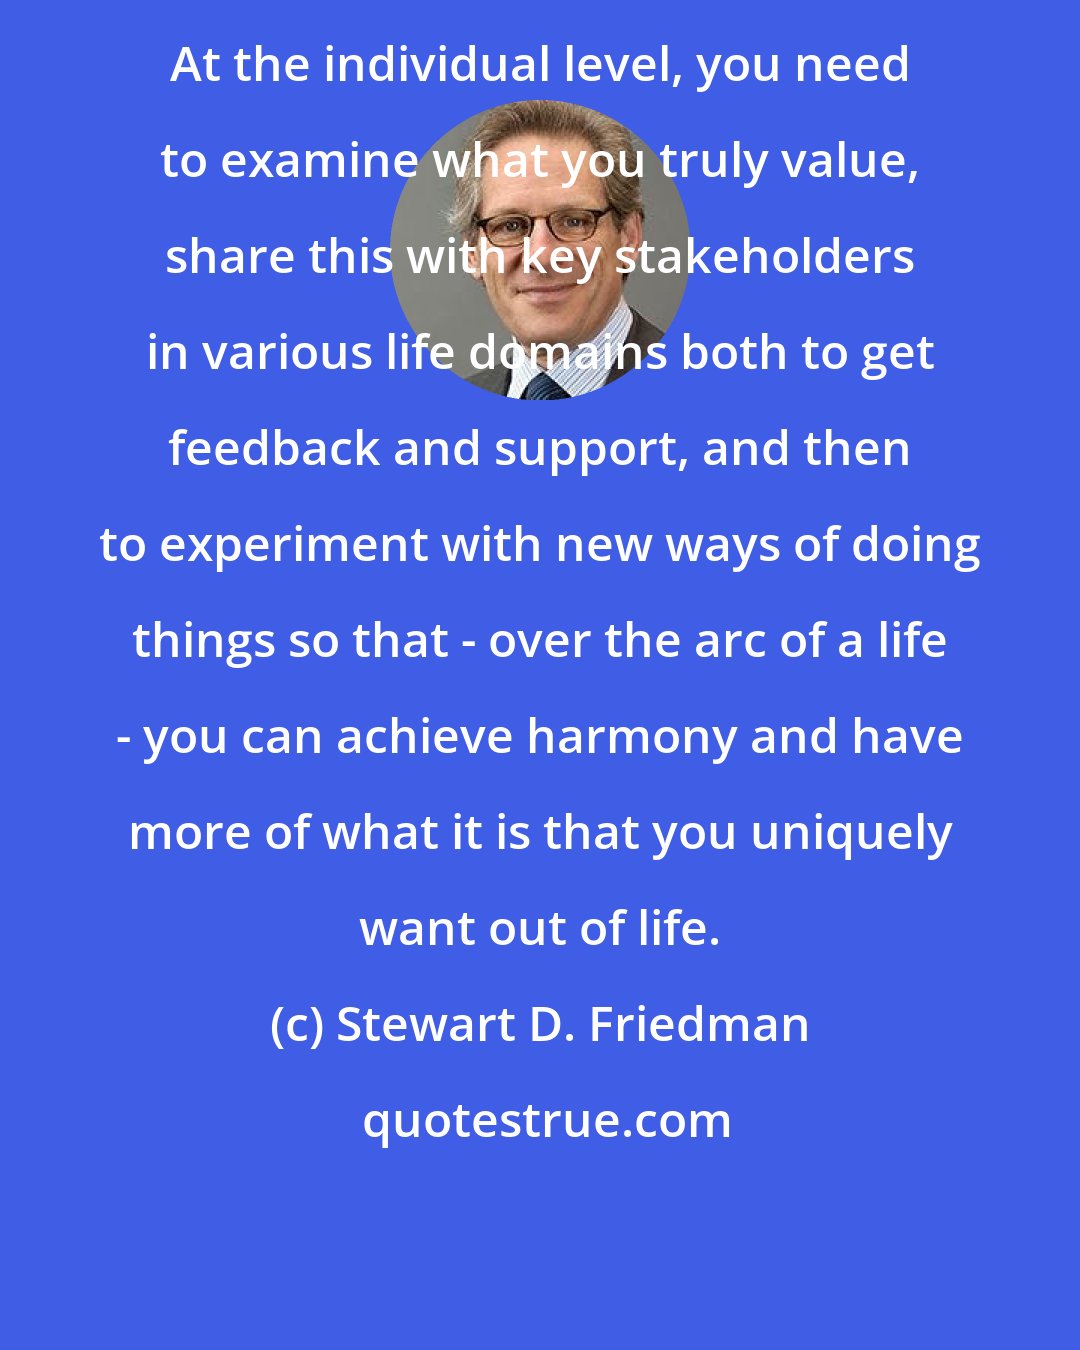 Stewart D. Friedman: At the individual level, you need to examine what you truly value, share this with key stakeholders in various life domains both to get feedback and support, and then to experiment with new ways of doing things so that - over the arc of a life - you can achieve harmony and have more of what it is that you uniquely want out of life.